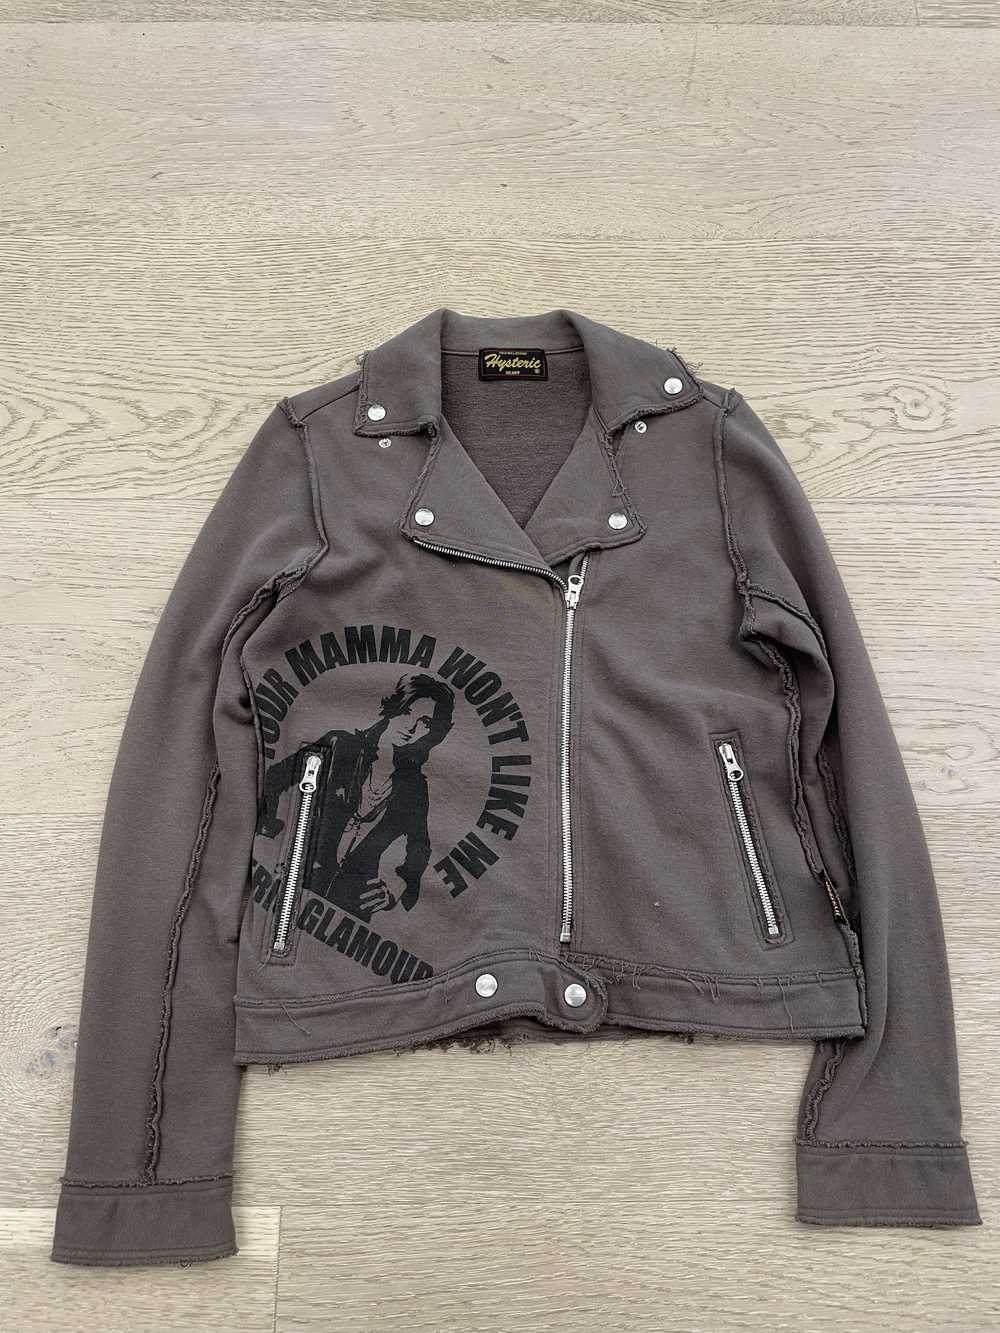 Hysteric Glamour Hysteric Glamour Moto Jacket - image 1